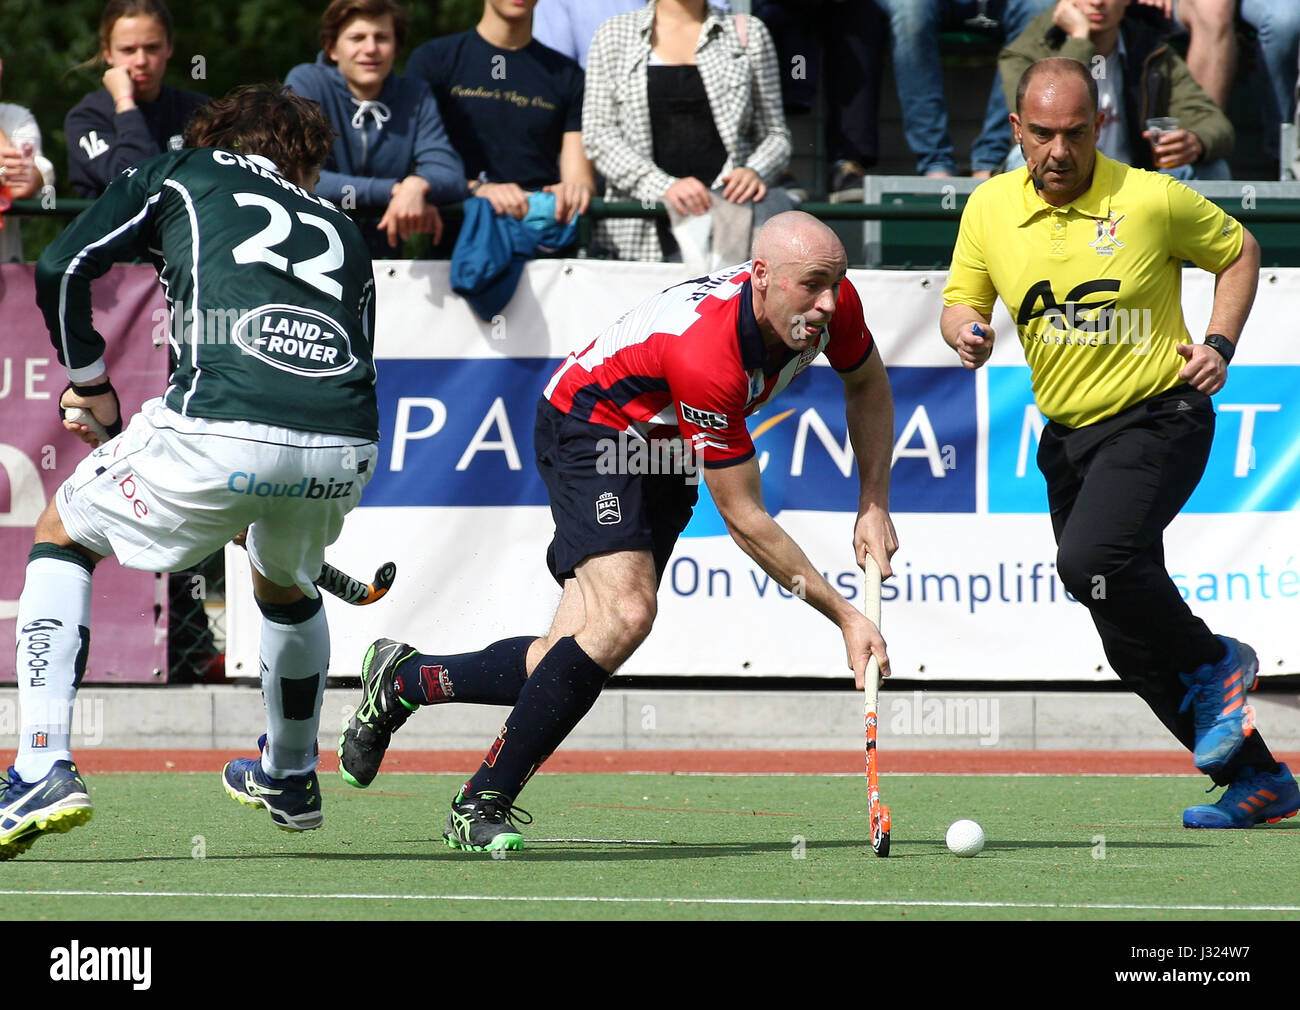 Waterloo, Belgium. 01st May, 2017. Honor Mens National League, Glenn Turner of Leopold in game action, during the match Waterloo Ducks-Leopold. Credit: Leo Cavallo/Alamy Live News Stock Photo